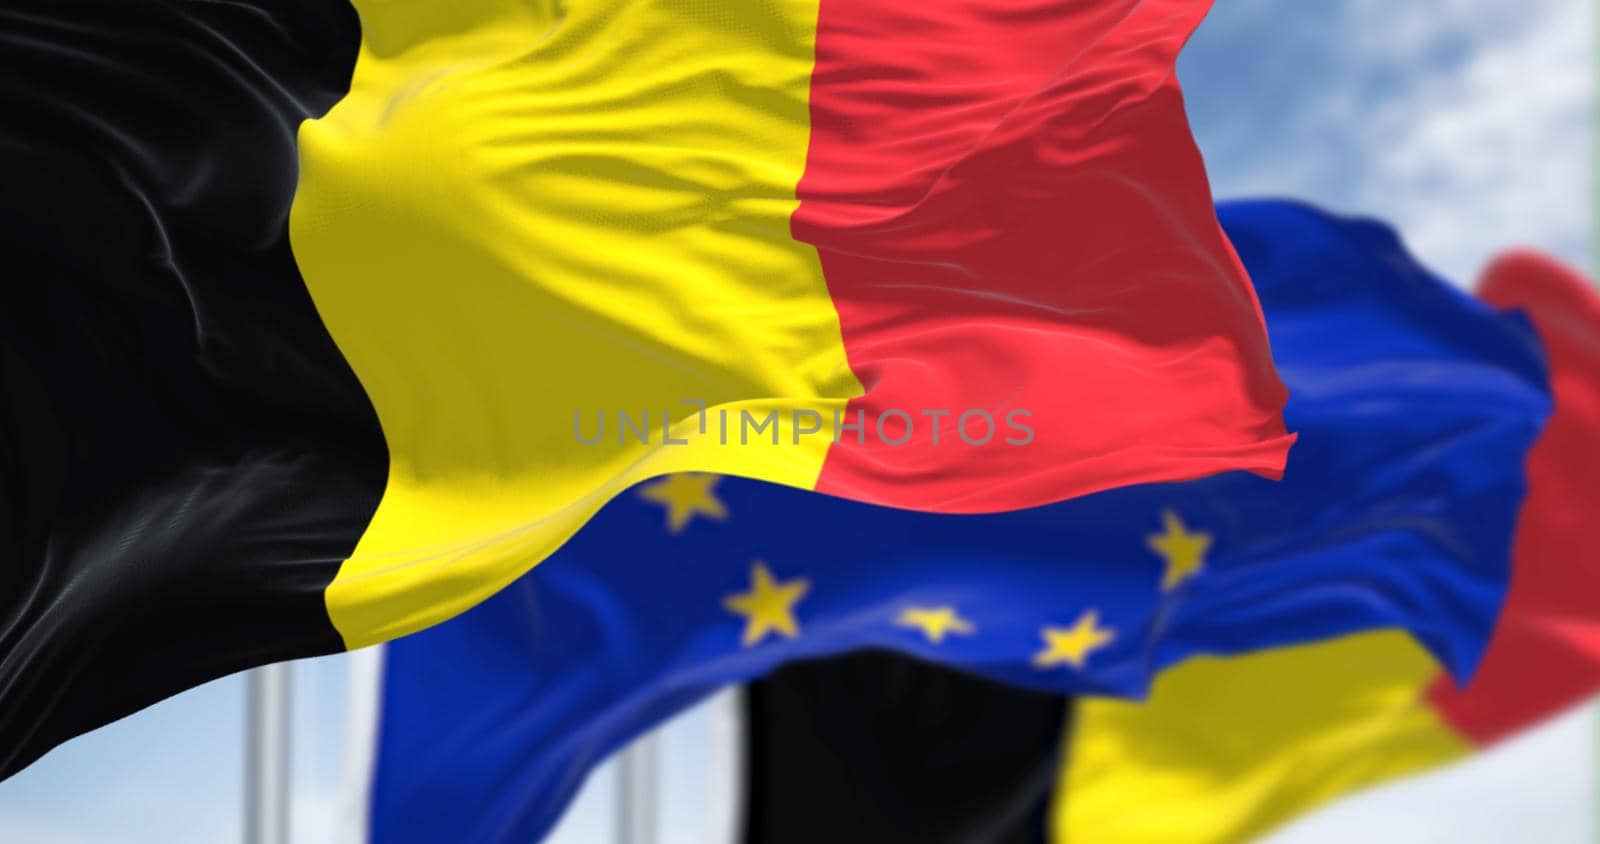 Detail of the national flag of Belgium waving in the wind with blurred european union flag in the background on a clear day by rarrarorro